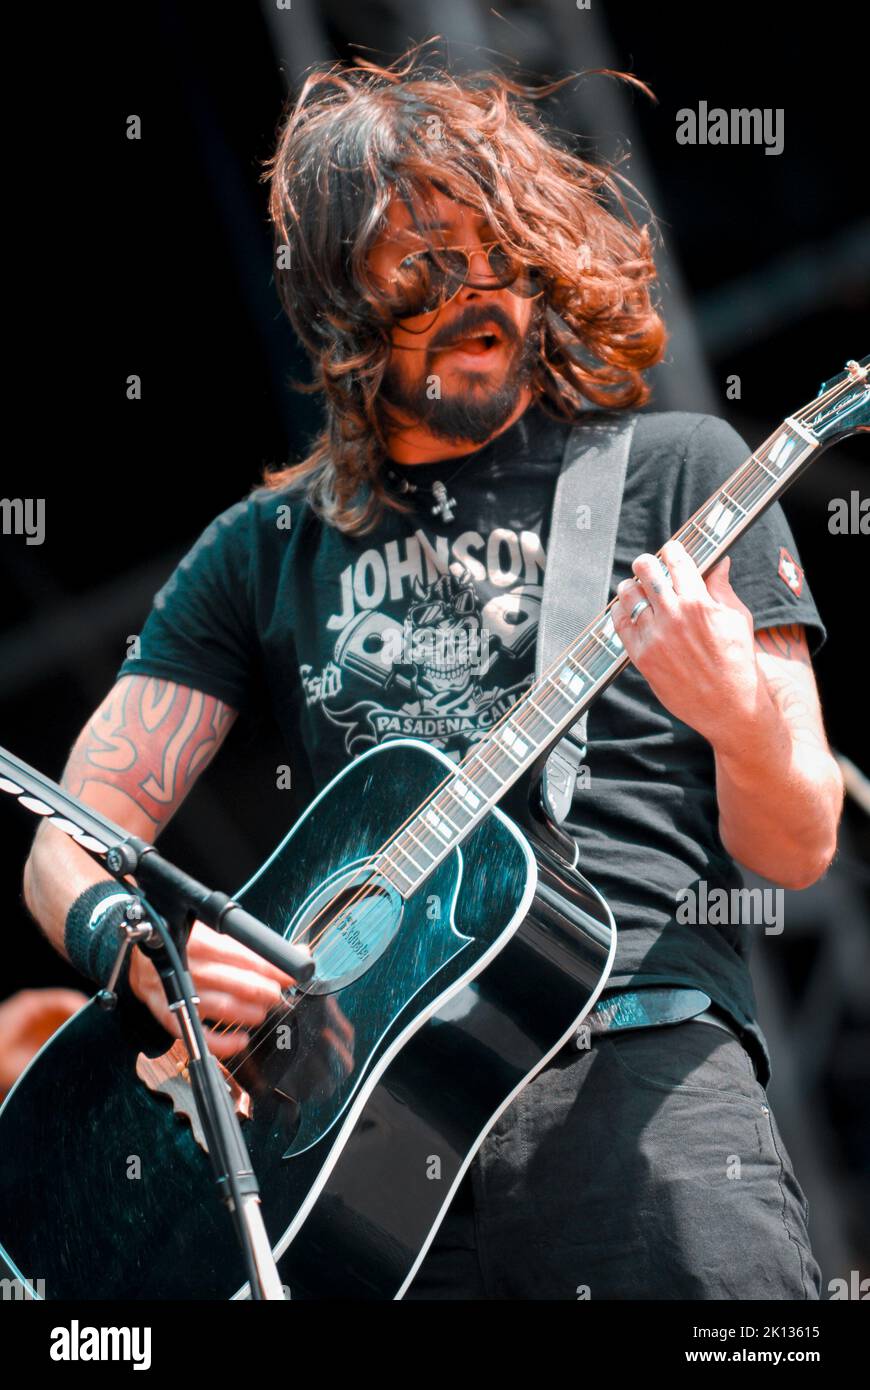 Dave Grohl - Foo Fighters, V2007, Hylands Park, Chelmsford, Essex, Britain - 18 August 2007 Stock Photo